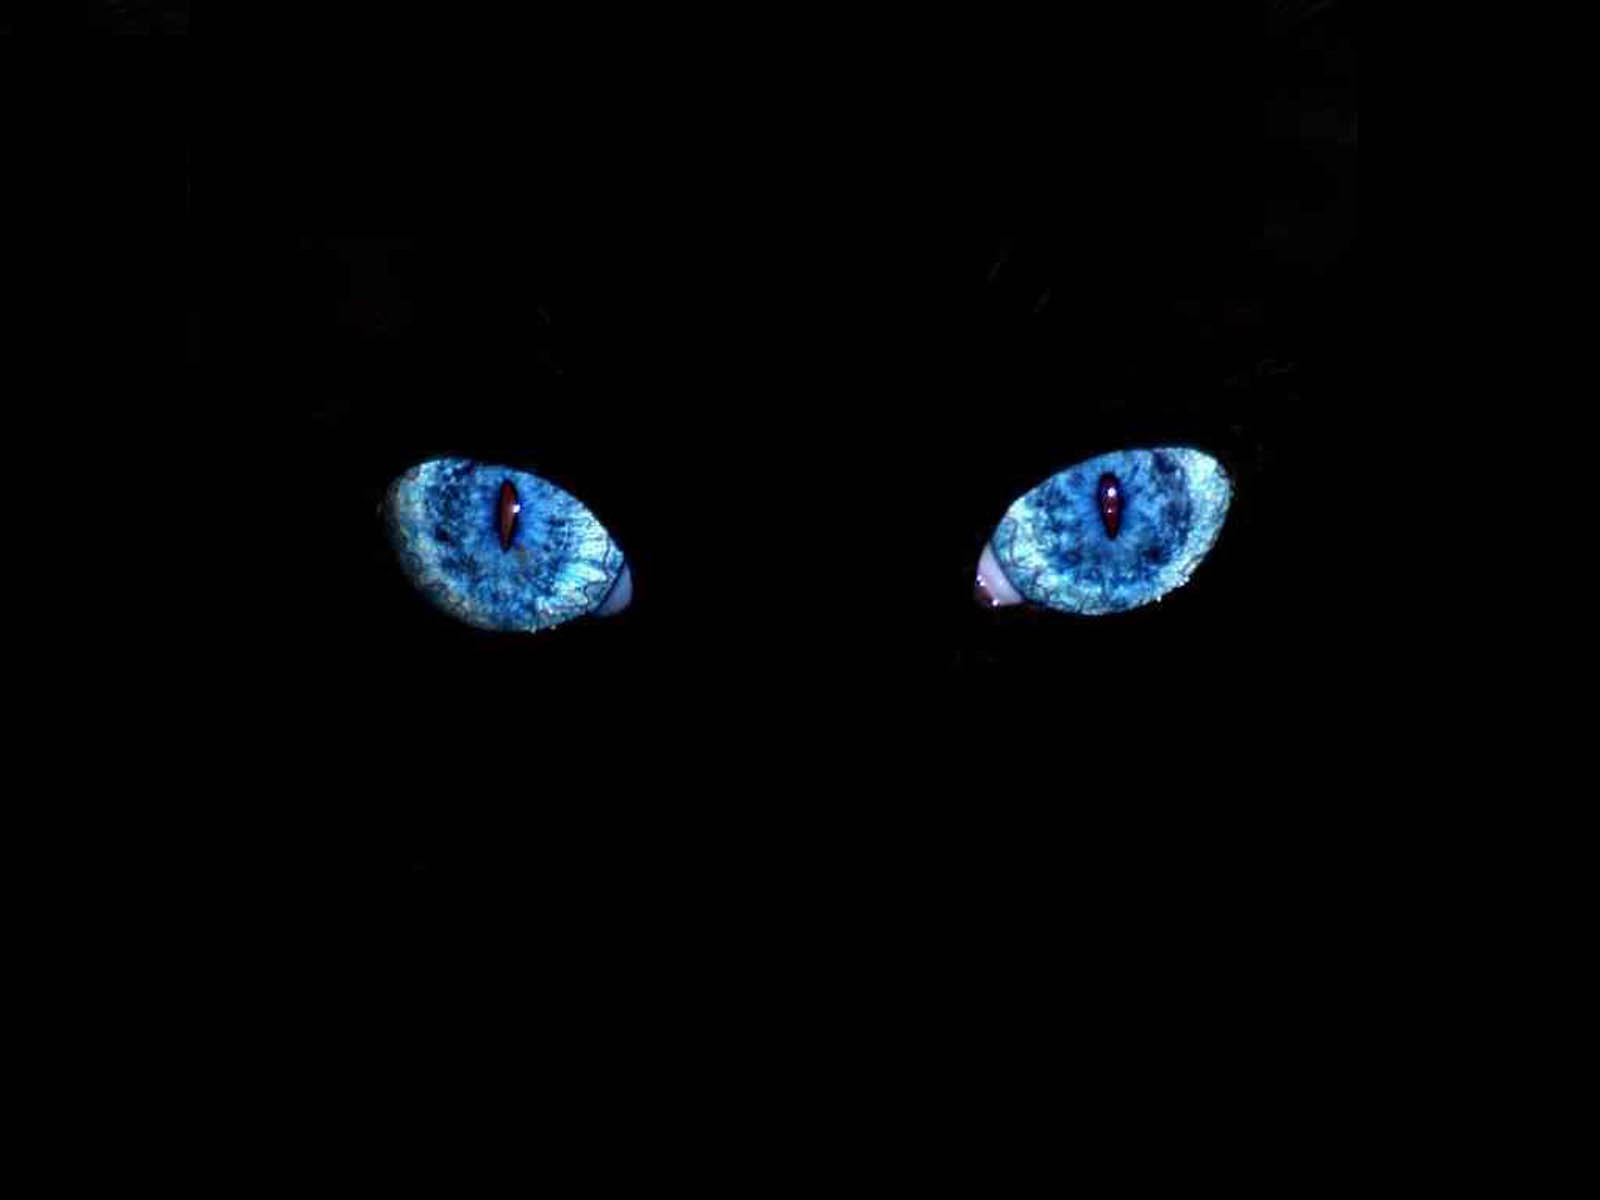 Tag Black Cat Blue Eyes Wallpapers Images Paos and Pictures for